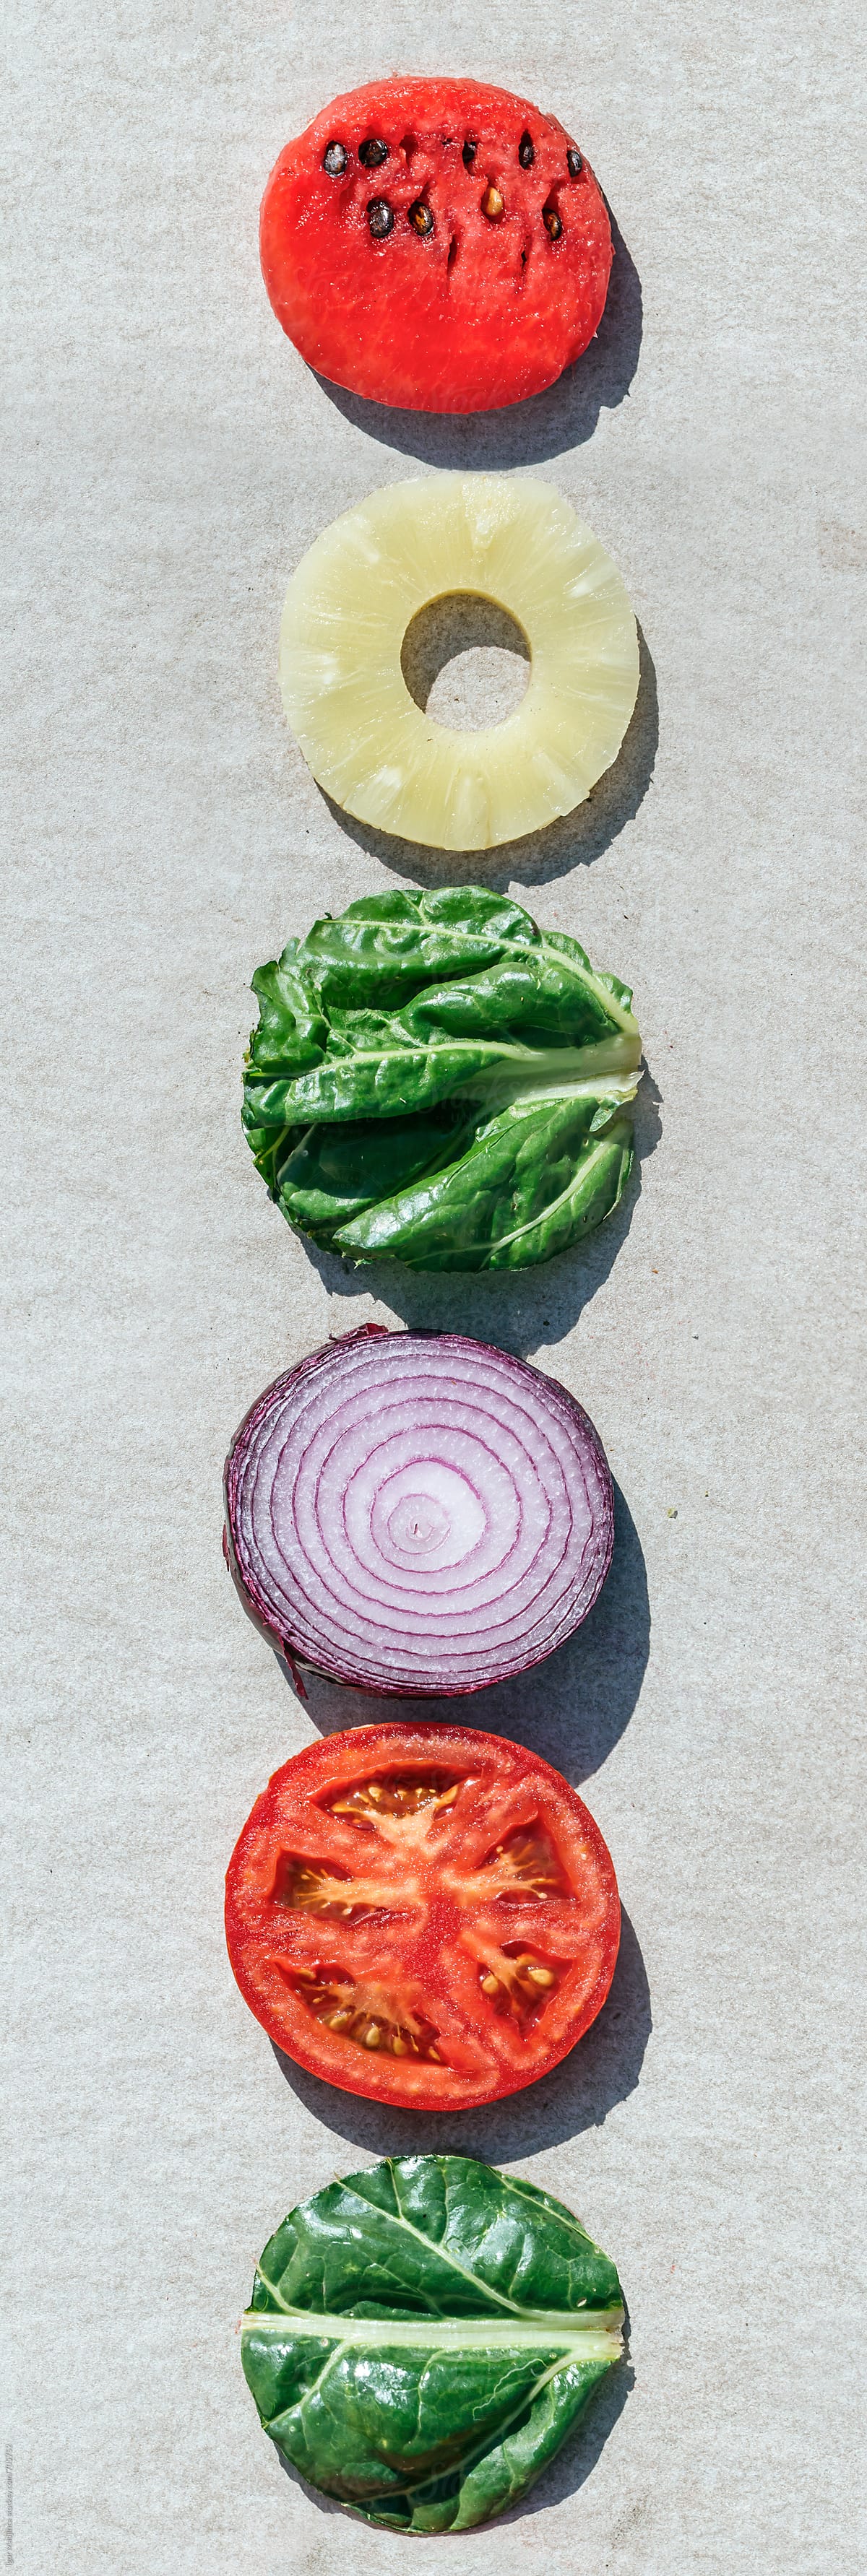 a series of colorful fruits and vegetables in the same form, circle